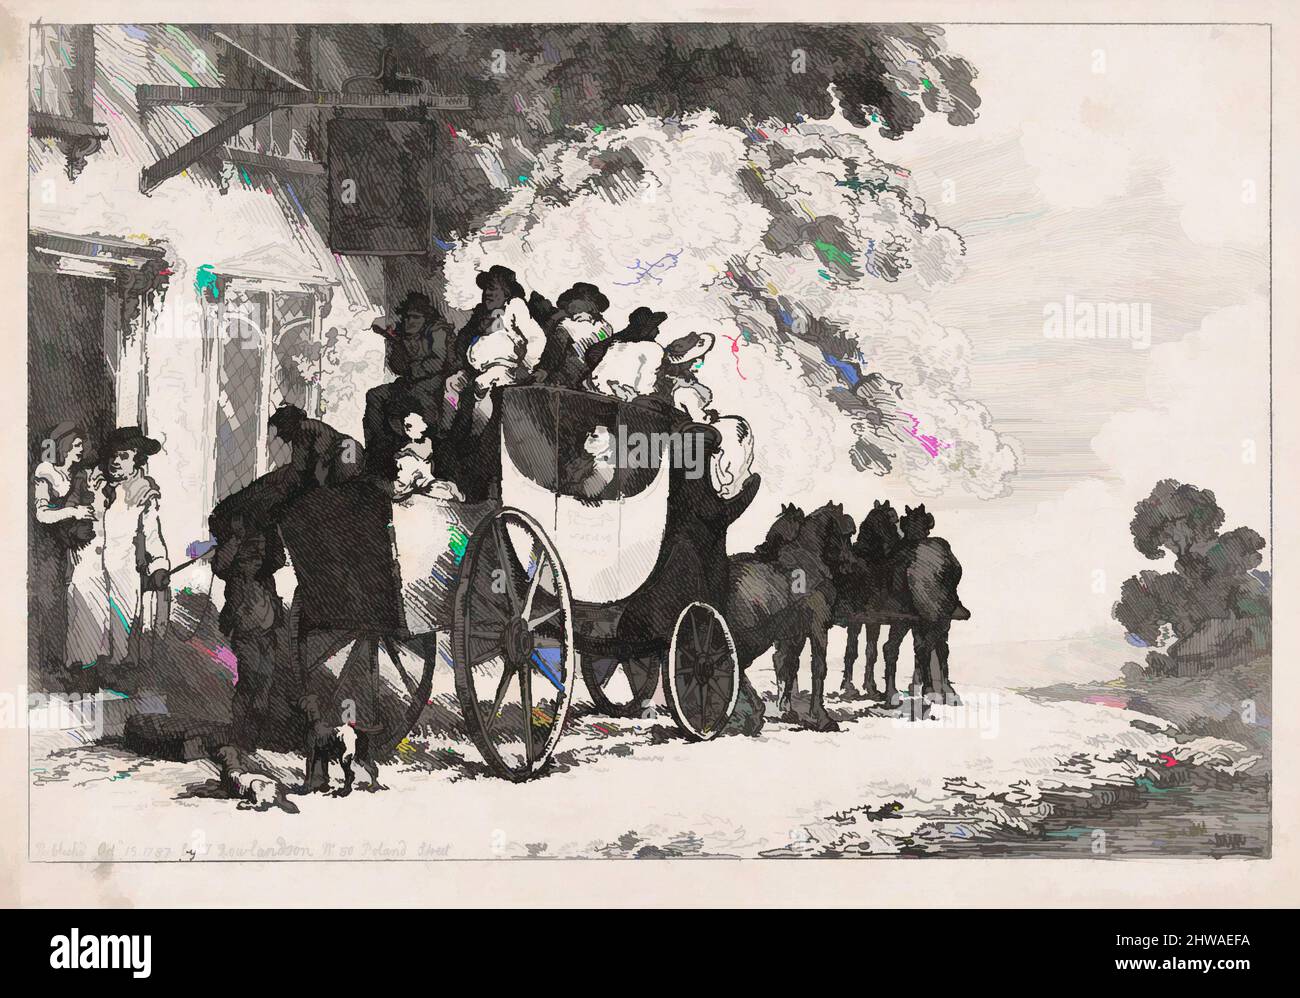 Art inspired by Drawings and Prints, Print, Stage Coach Setting Out From a Posting-House, Publisher, Artist, John Harris, Thomas Rowlandson, Classic works modernized by Artotop with a splash of modernity. Shapes, color and value, eye-catching visual impact on art. Emotions through freedom of artworks in a contemporary way. A timeless message pursuing a wildly creative new direction. Artists turning to the digital medium and creating the Artotop NFT Stock Photo